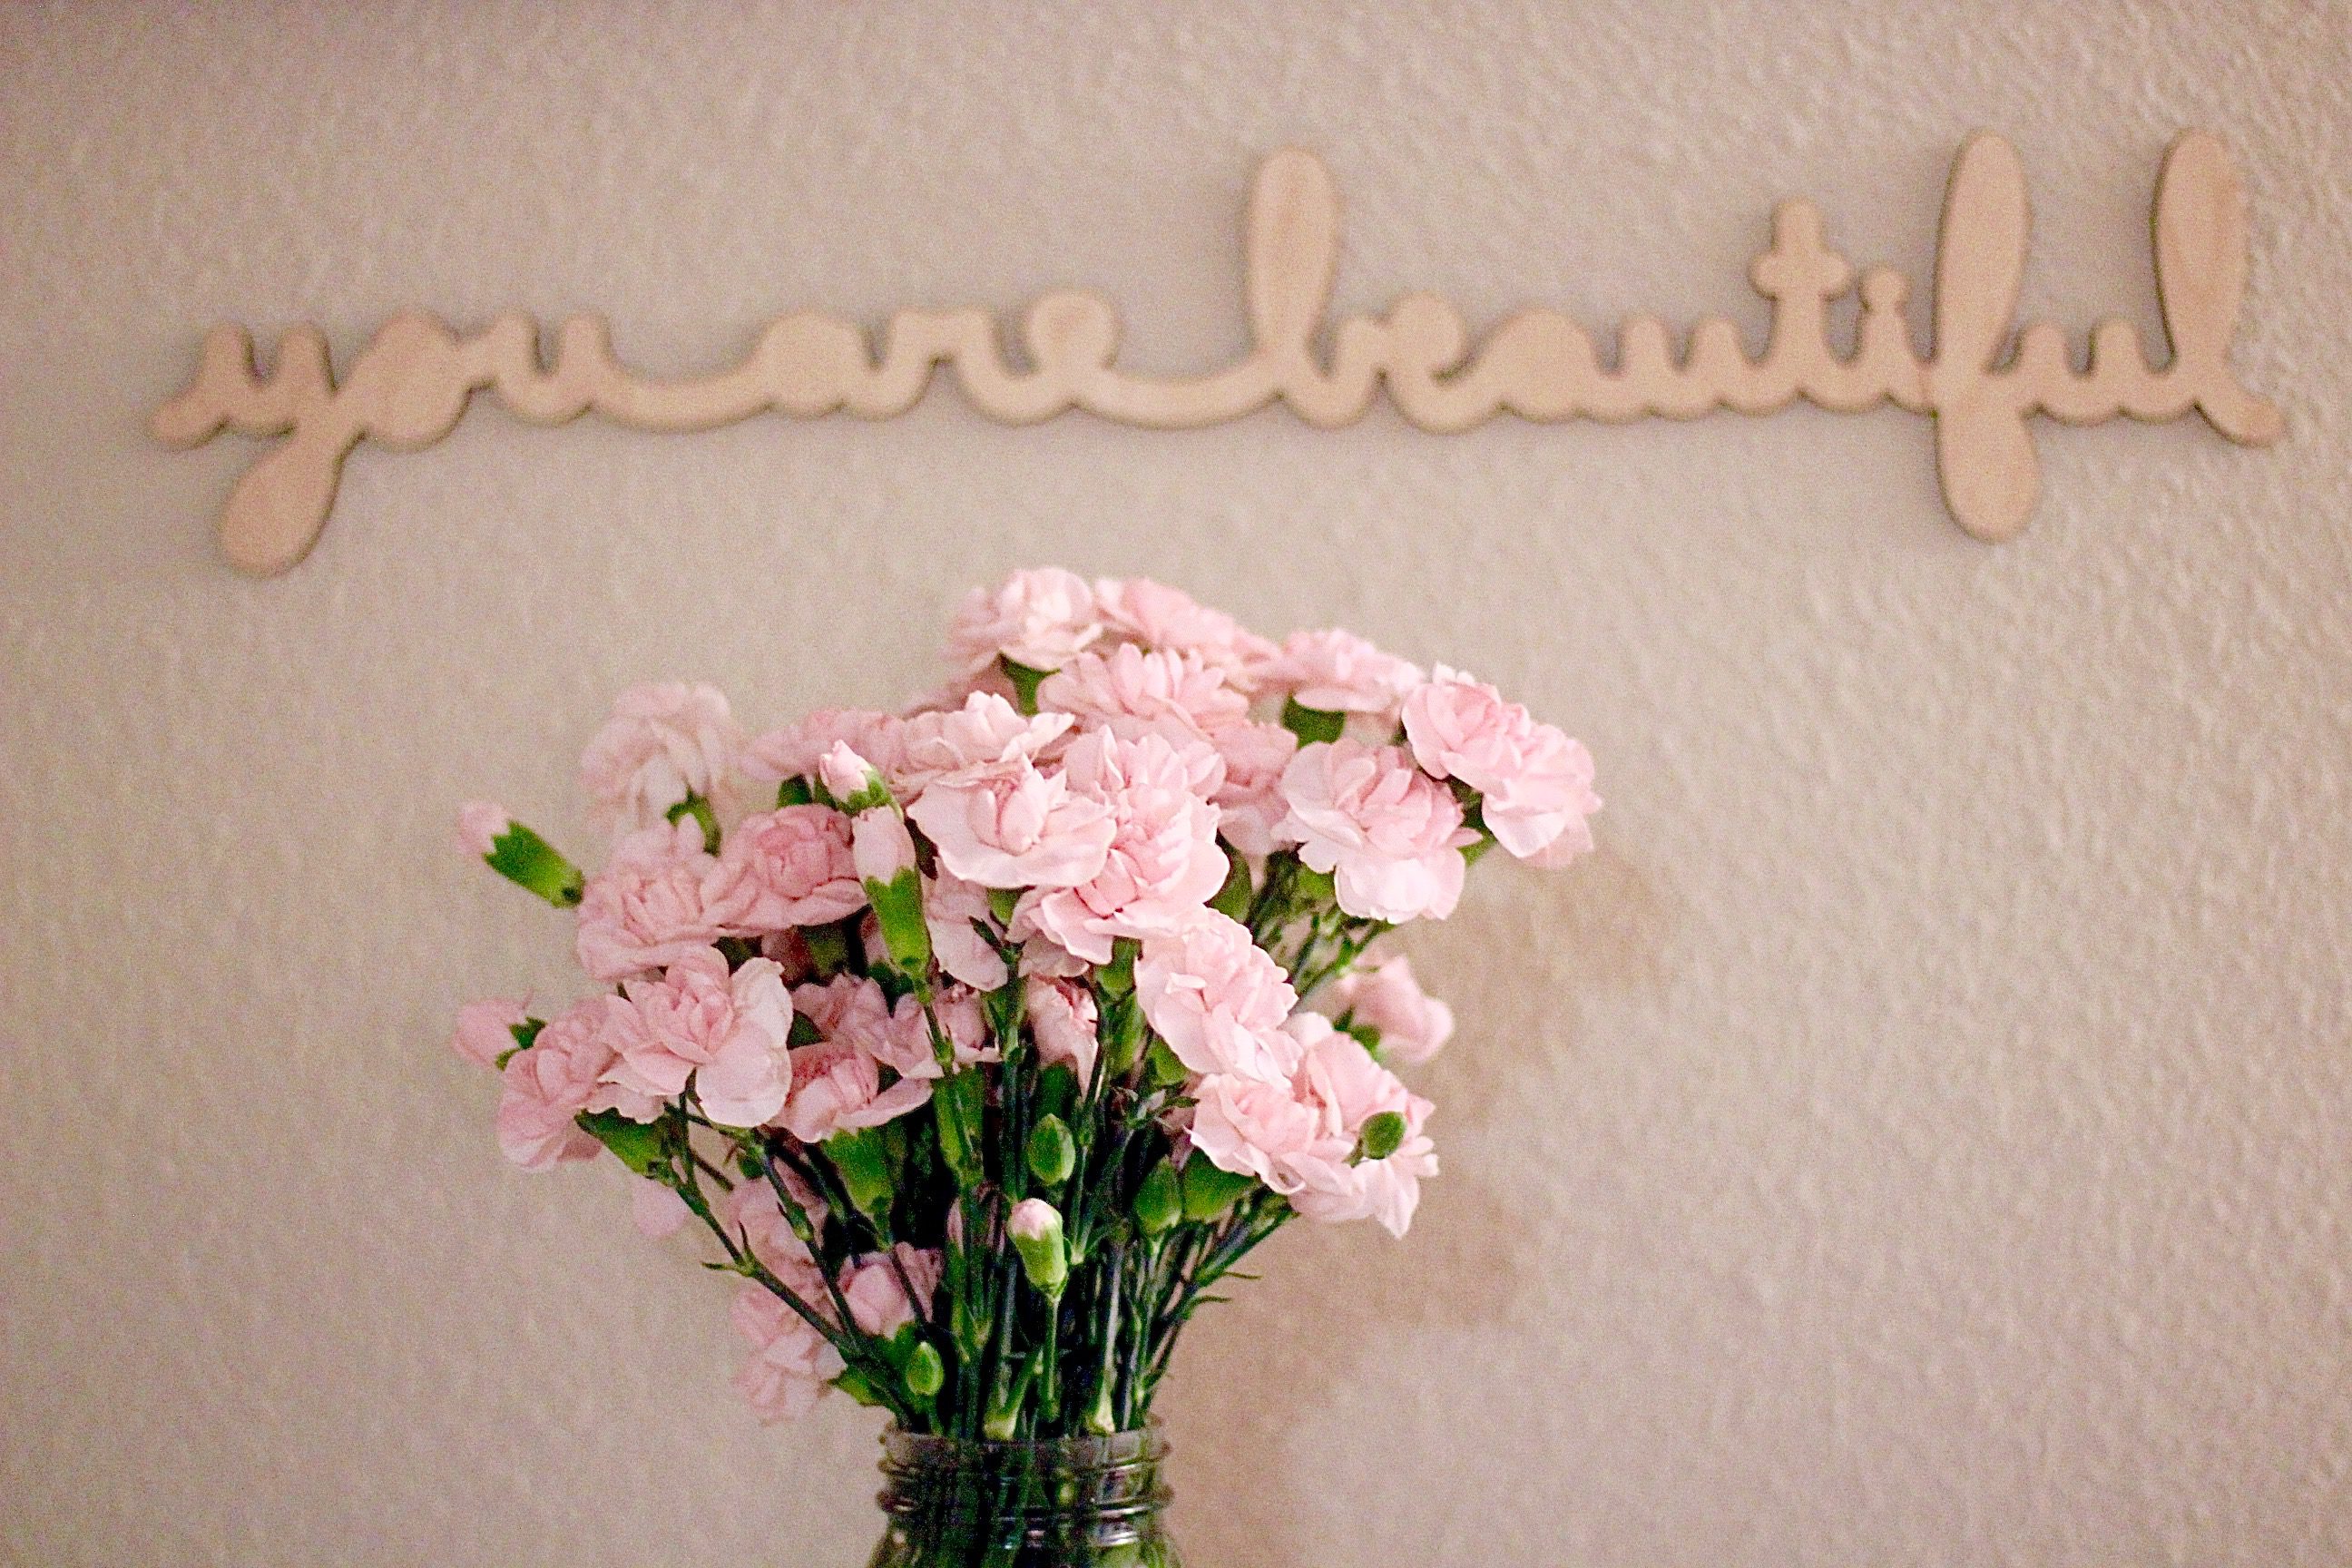 missyonmadison, melissa tierney, uncommon goods, gummy bear light, gummy bear night light, interior design, interior decor, interior decor inspo, pinterest ideas, you are beautiful, beautiful sign, wooden sign, inspirational decor, marquee light, movie props, initial lights, glitter mason jar, pink carnations, pink flowers, lifestyle blog, apartment decor, fashion blogger, home decor,